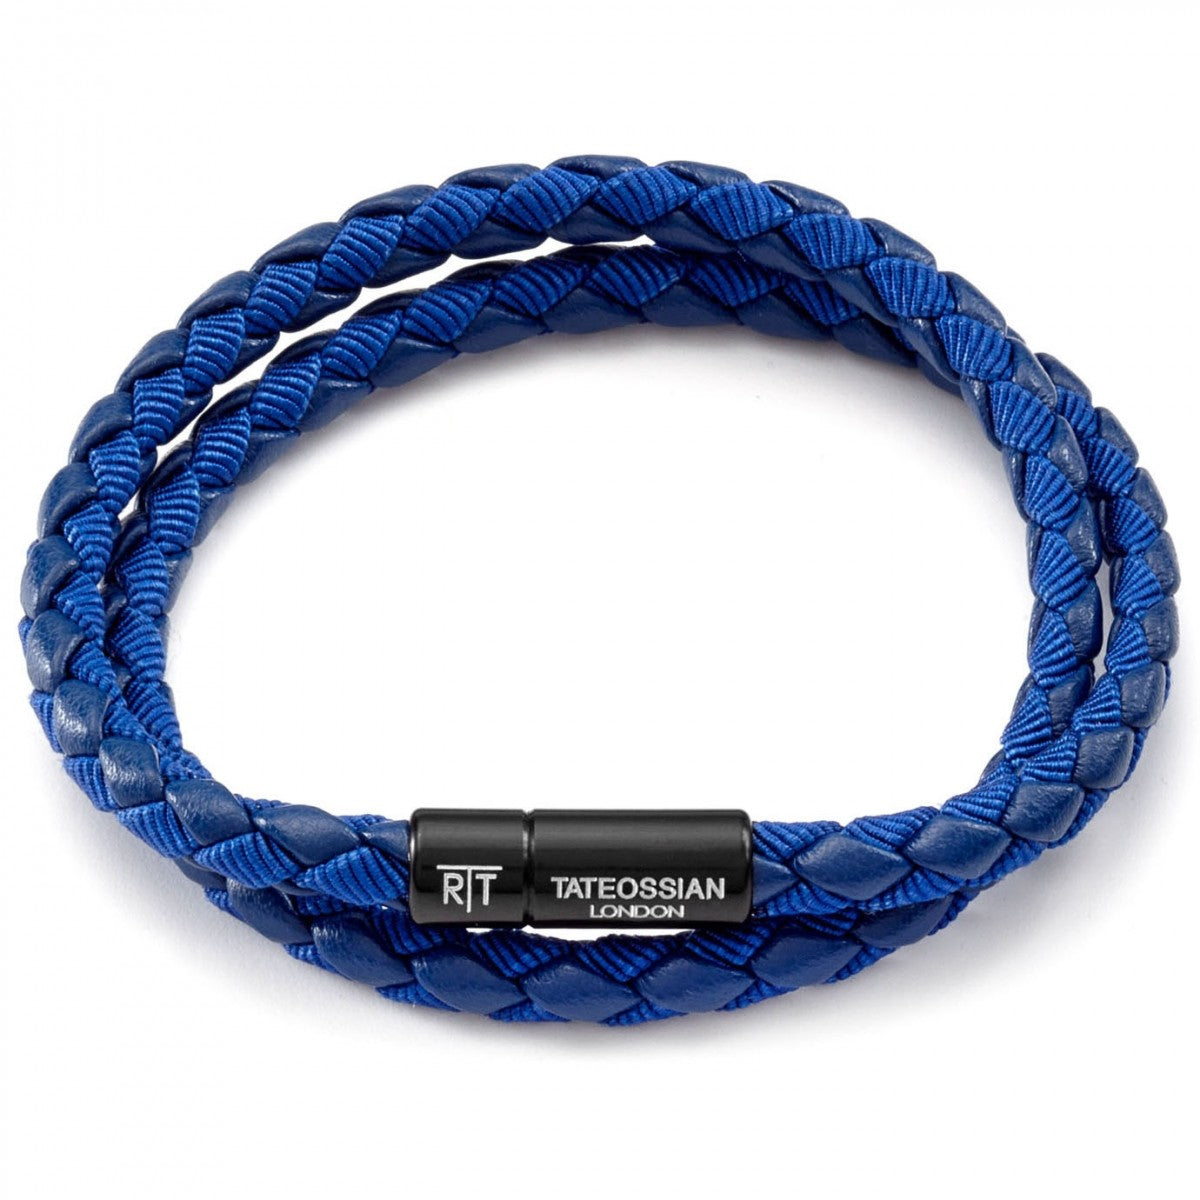 Black leather bracelet with blue stainless steel accents – Maverick Man